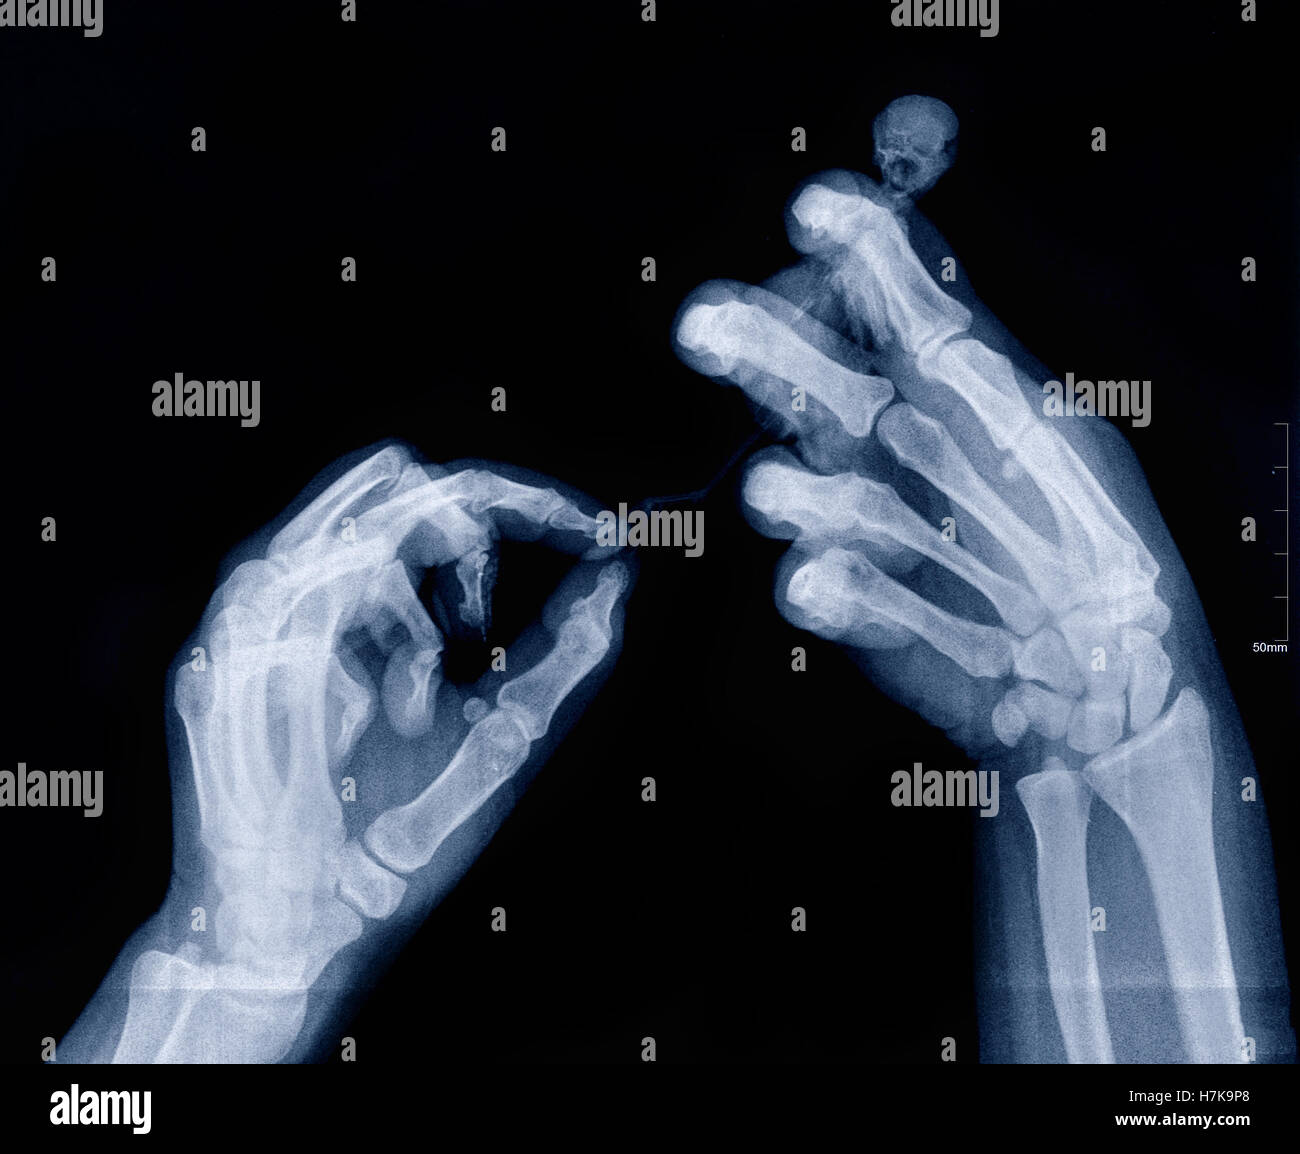 Xray image of human arms holding unknown creature Stock Photo